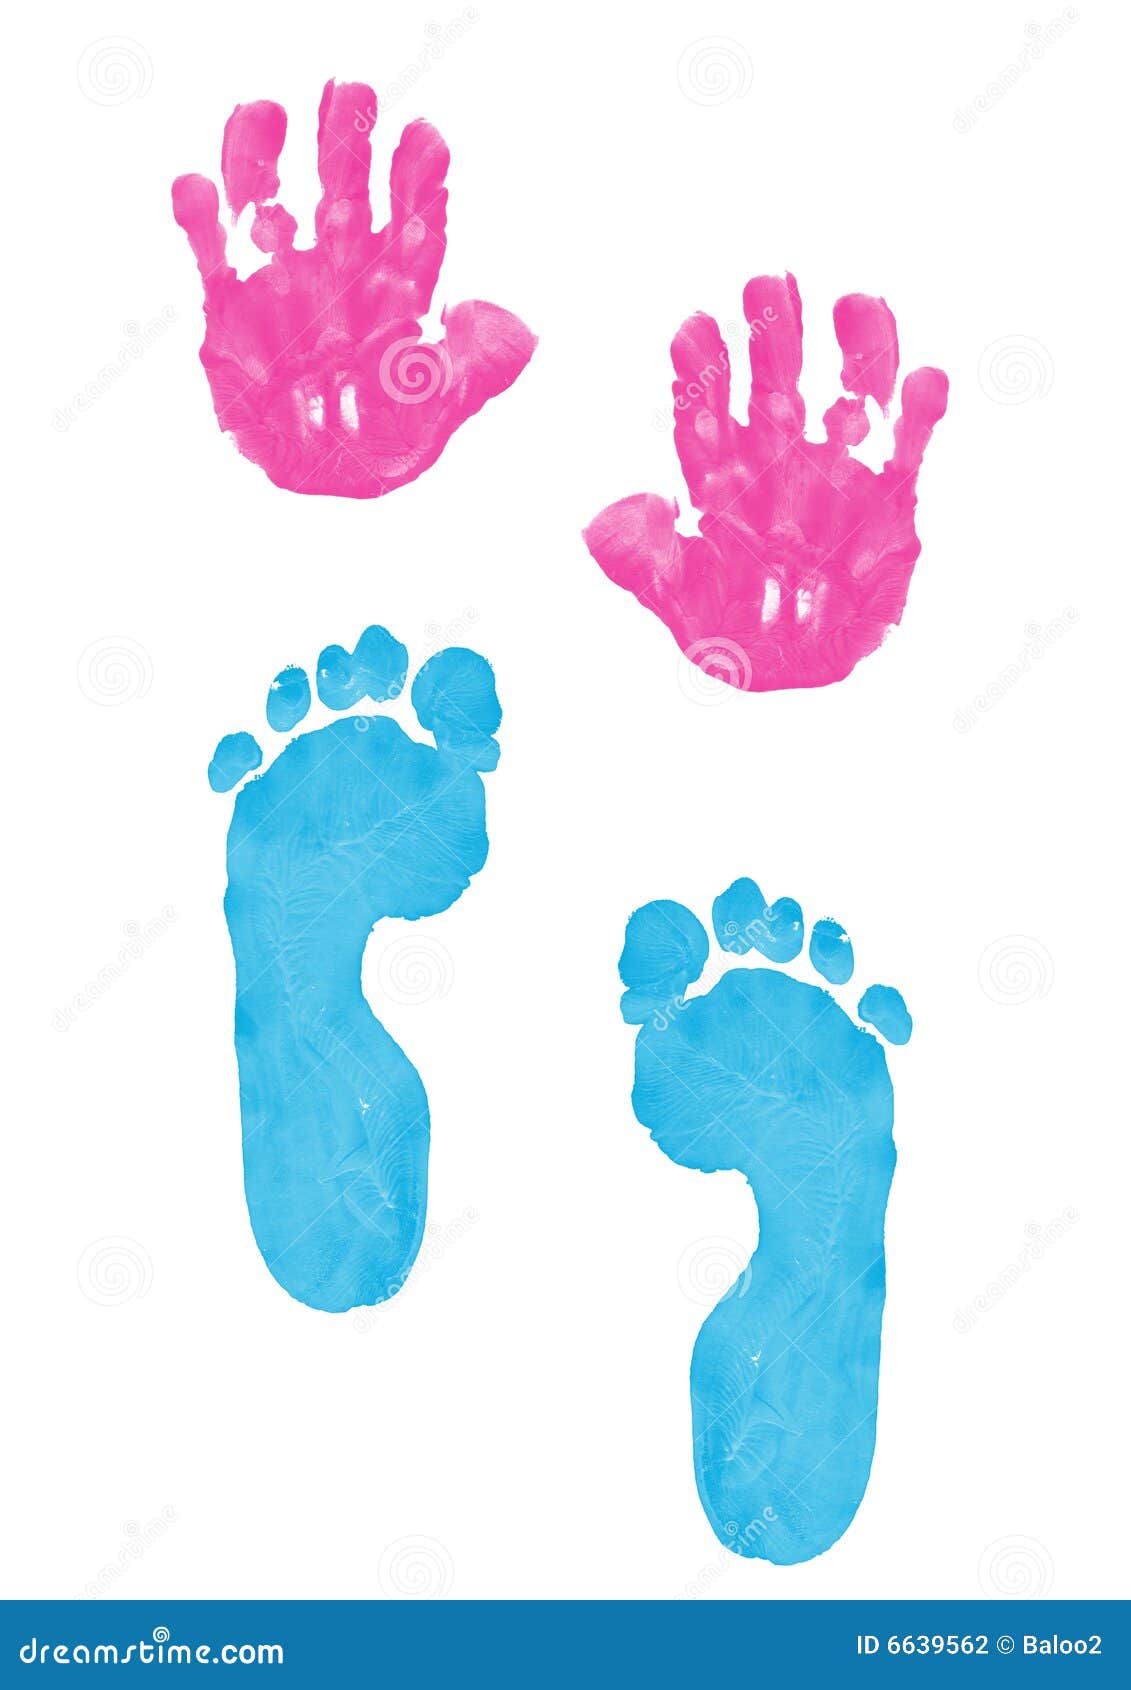 baby hands and feet clipart - photo #35